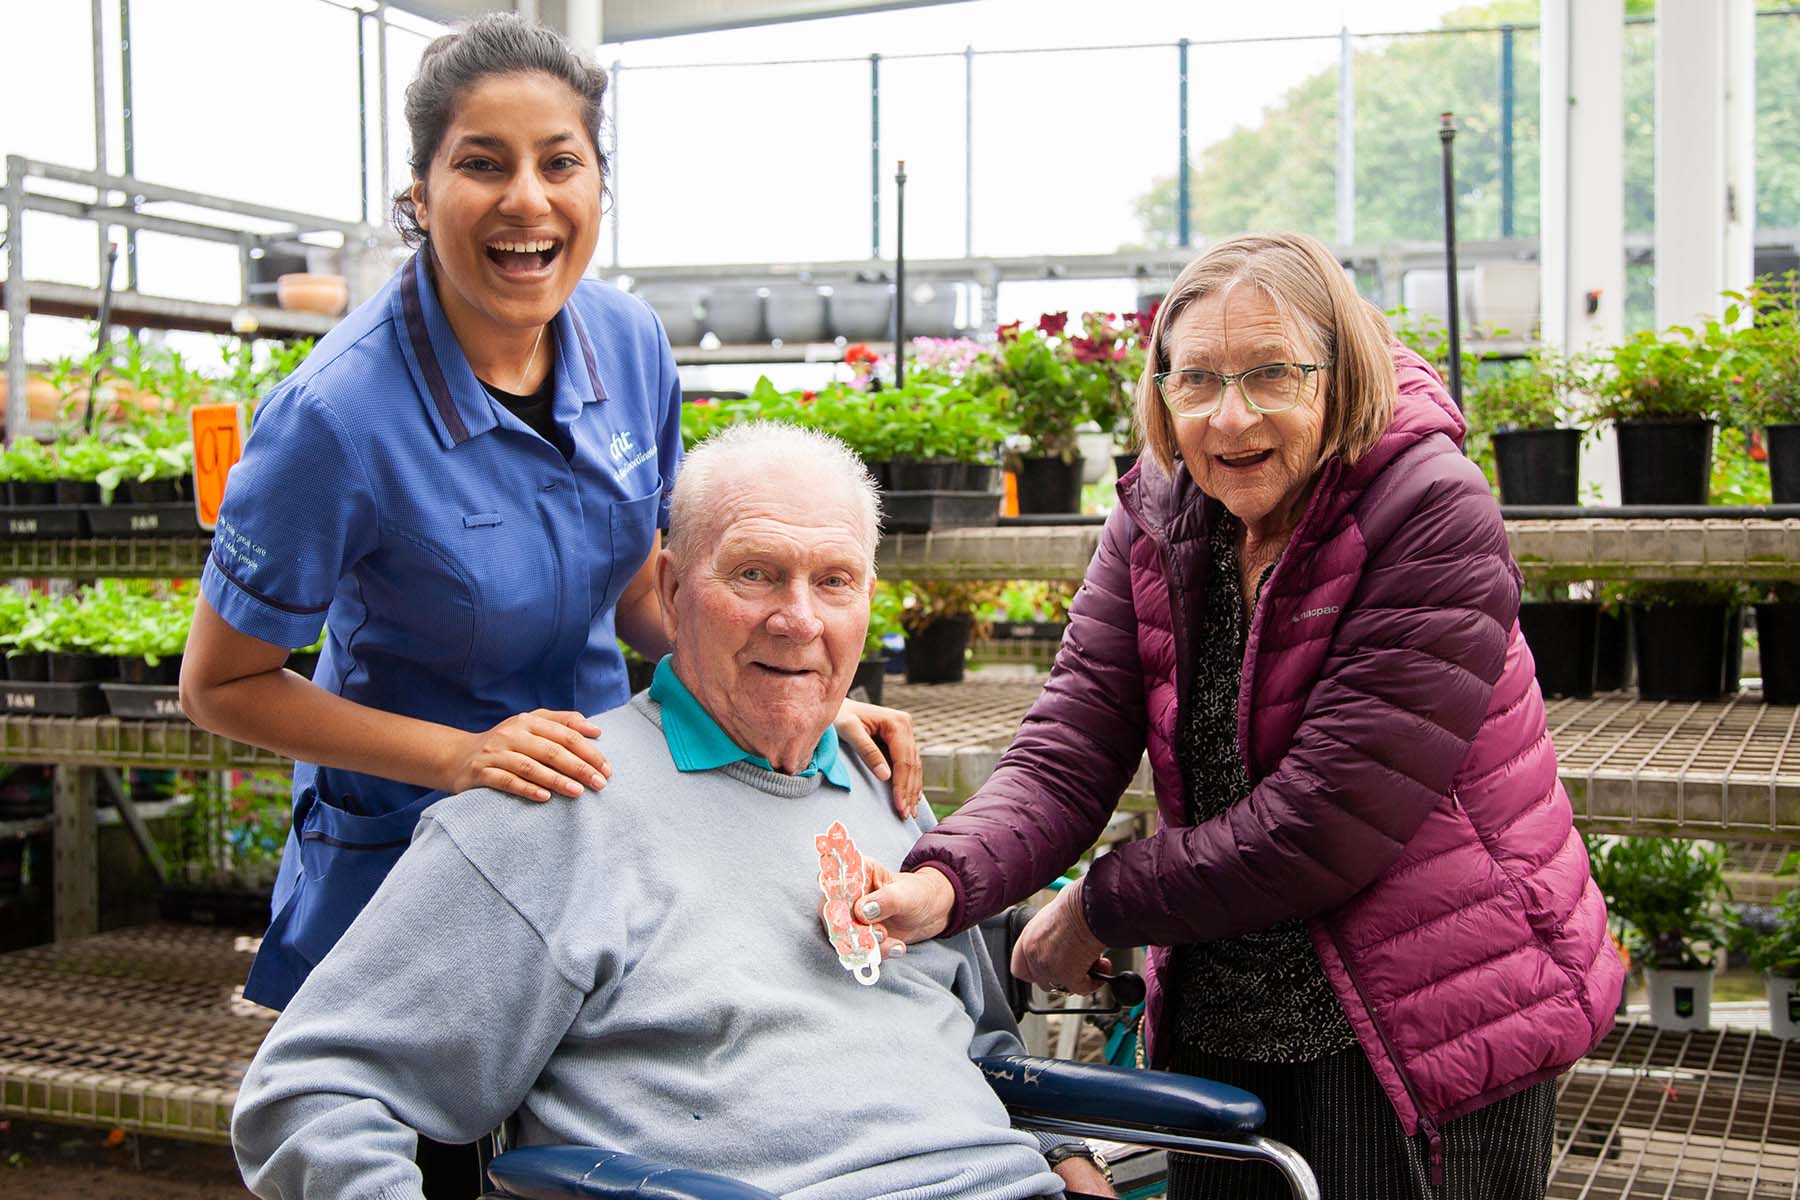 Living in a care home where every day can be enjoyable